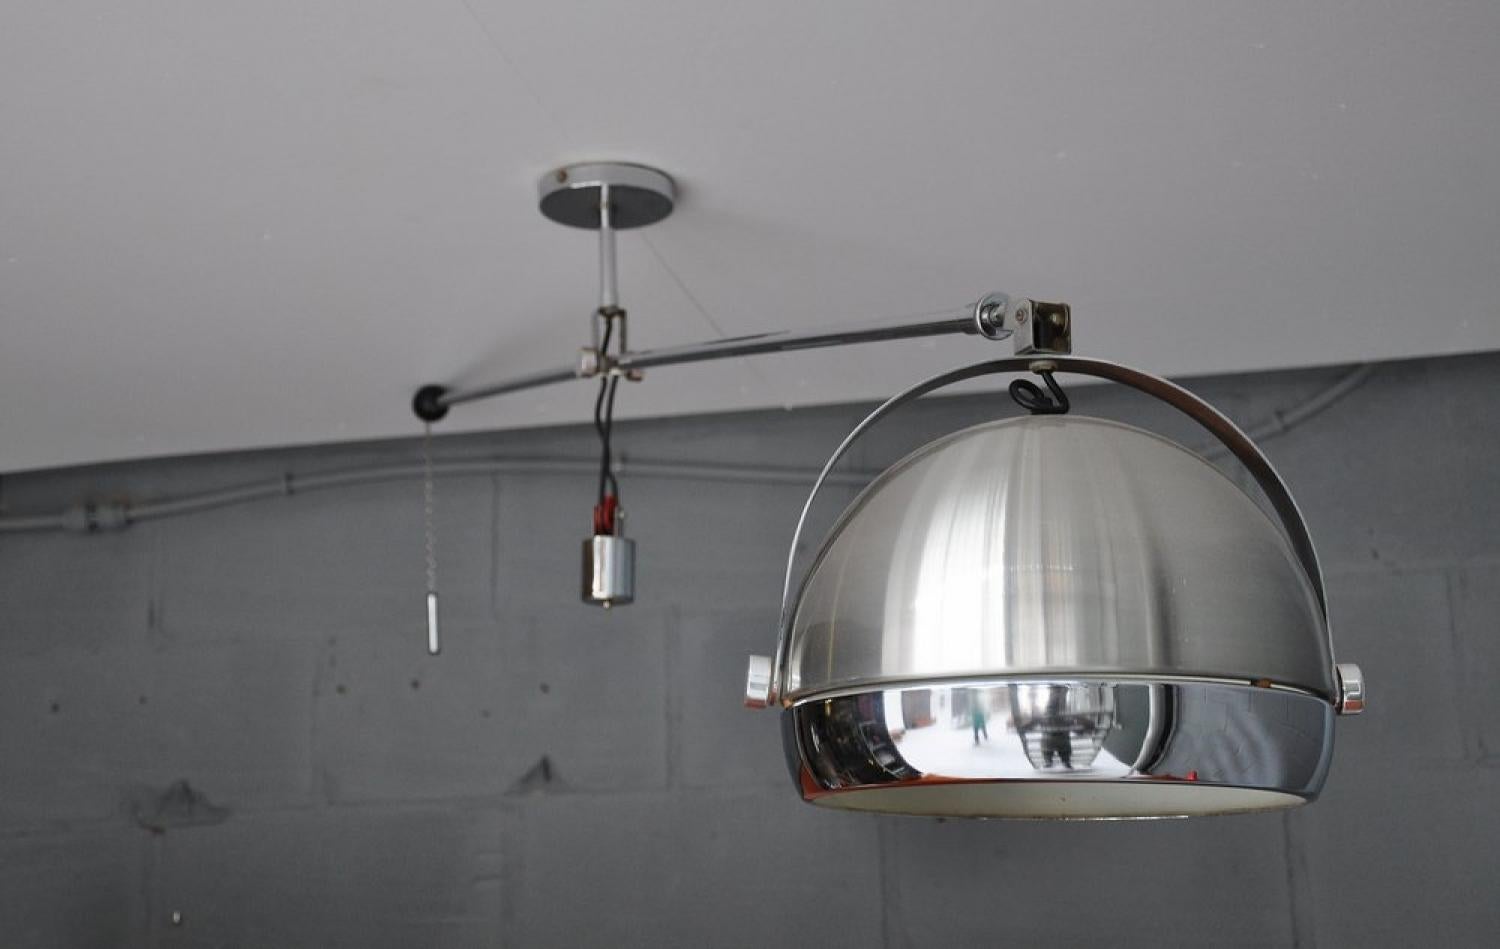 Very nice articulating ceiling balanced lamp made by Studio Reggiani, Italy 1970. This lamp has an extendable chrome plated arm and an aluminium shade. This is an amazing lamp for multiple purposes cause you can rotate it, and extend it up to 250 cm